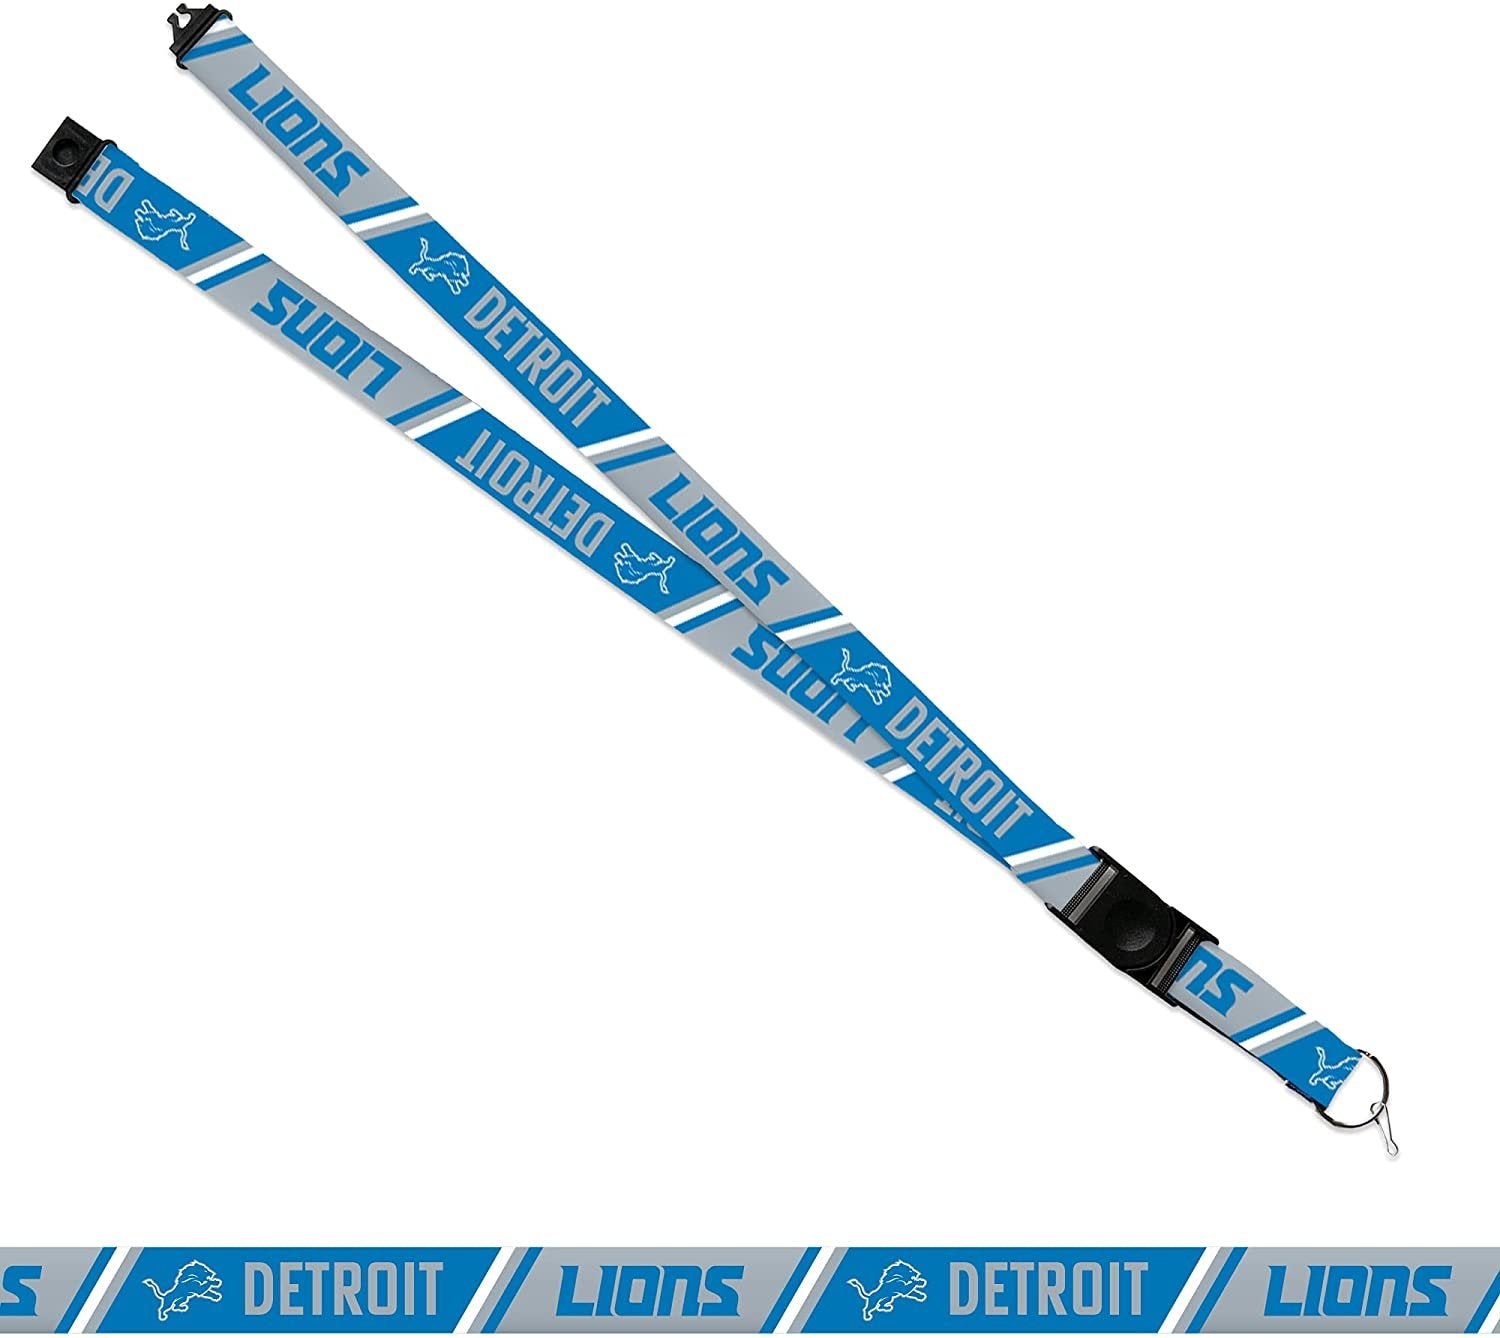 Detroit Lions Lanyard Keychain Double Sided Breakaway Safety Design Adult 18 Inch